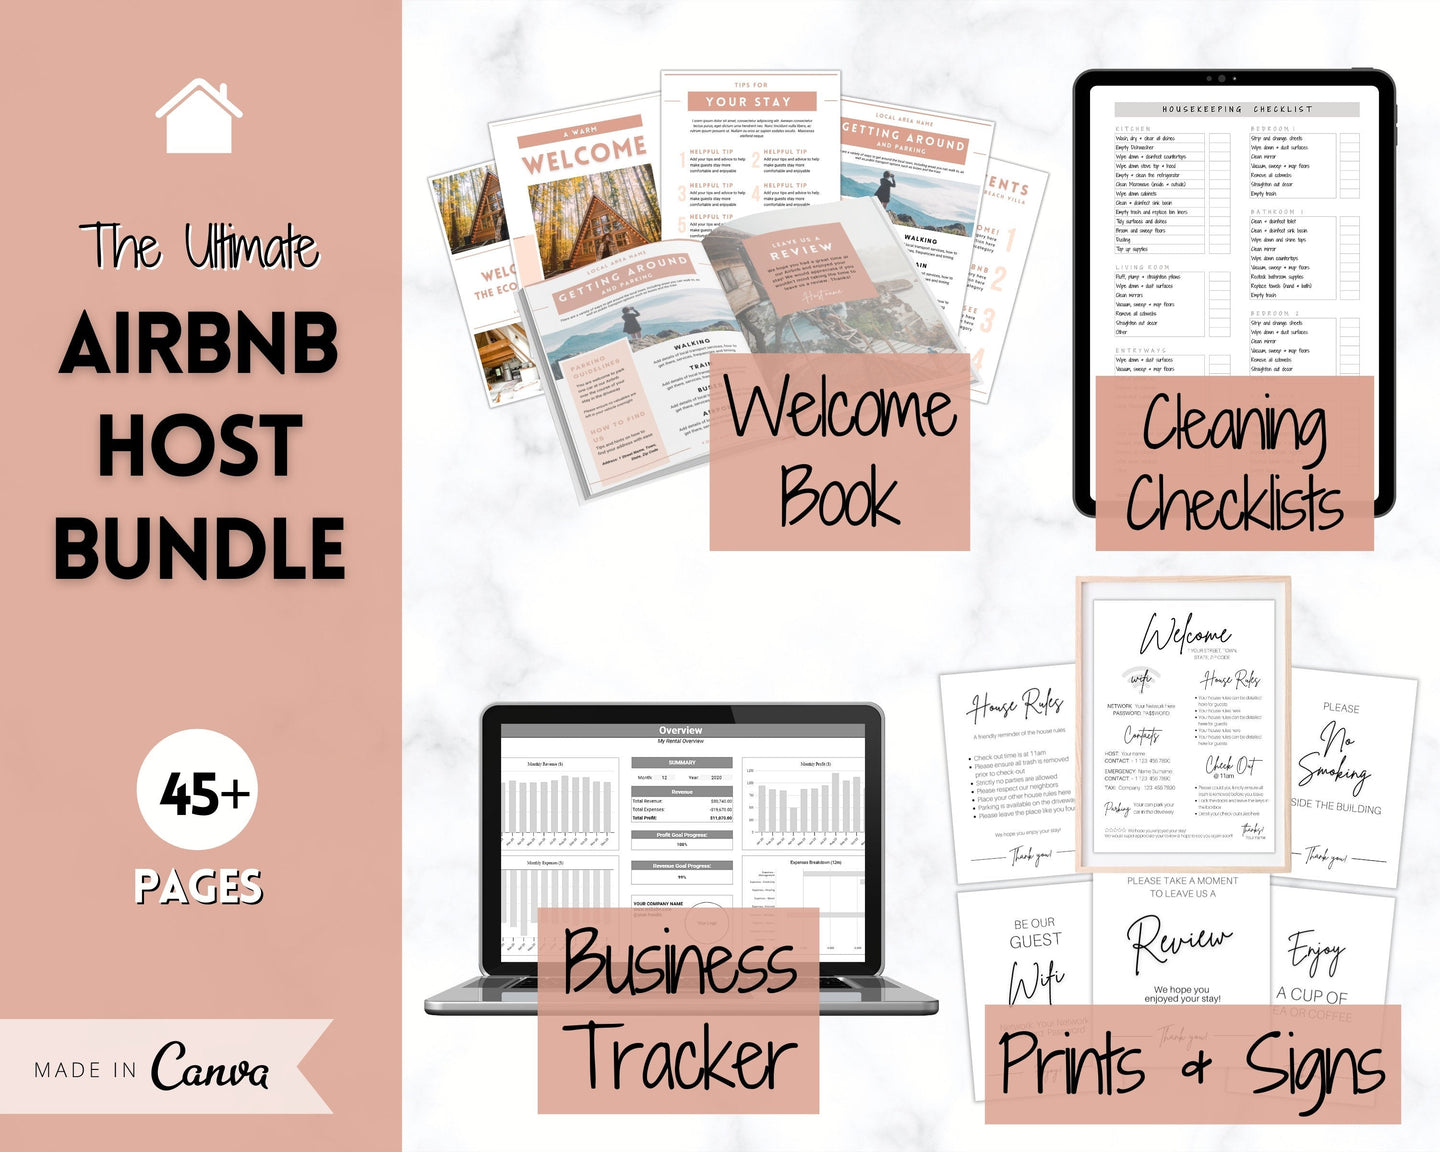 Airbnb Host BUNDLE! Editable Airbnb Signs, Welcome Book Template, Cleaning checklist, Business Tracker Spreadsheet, Air bnb Printables, VRBO | Brown